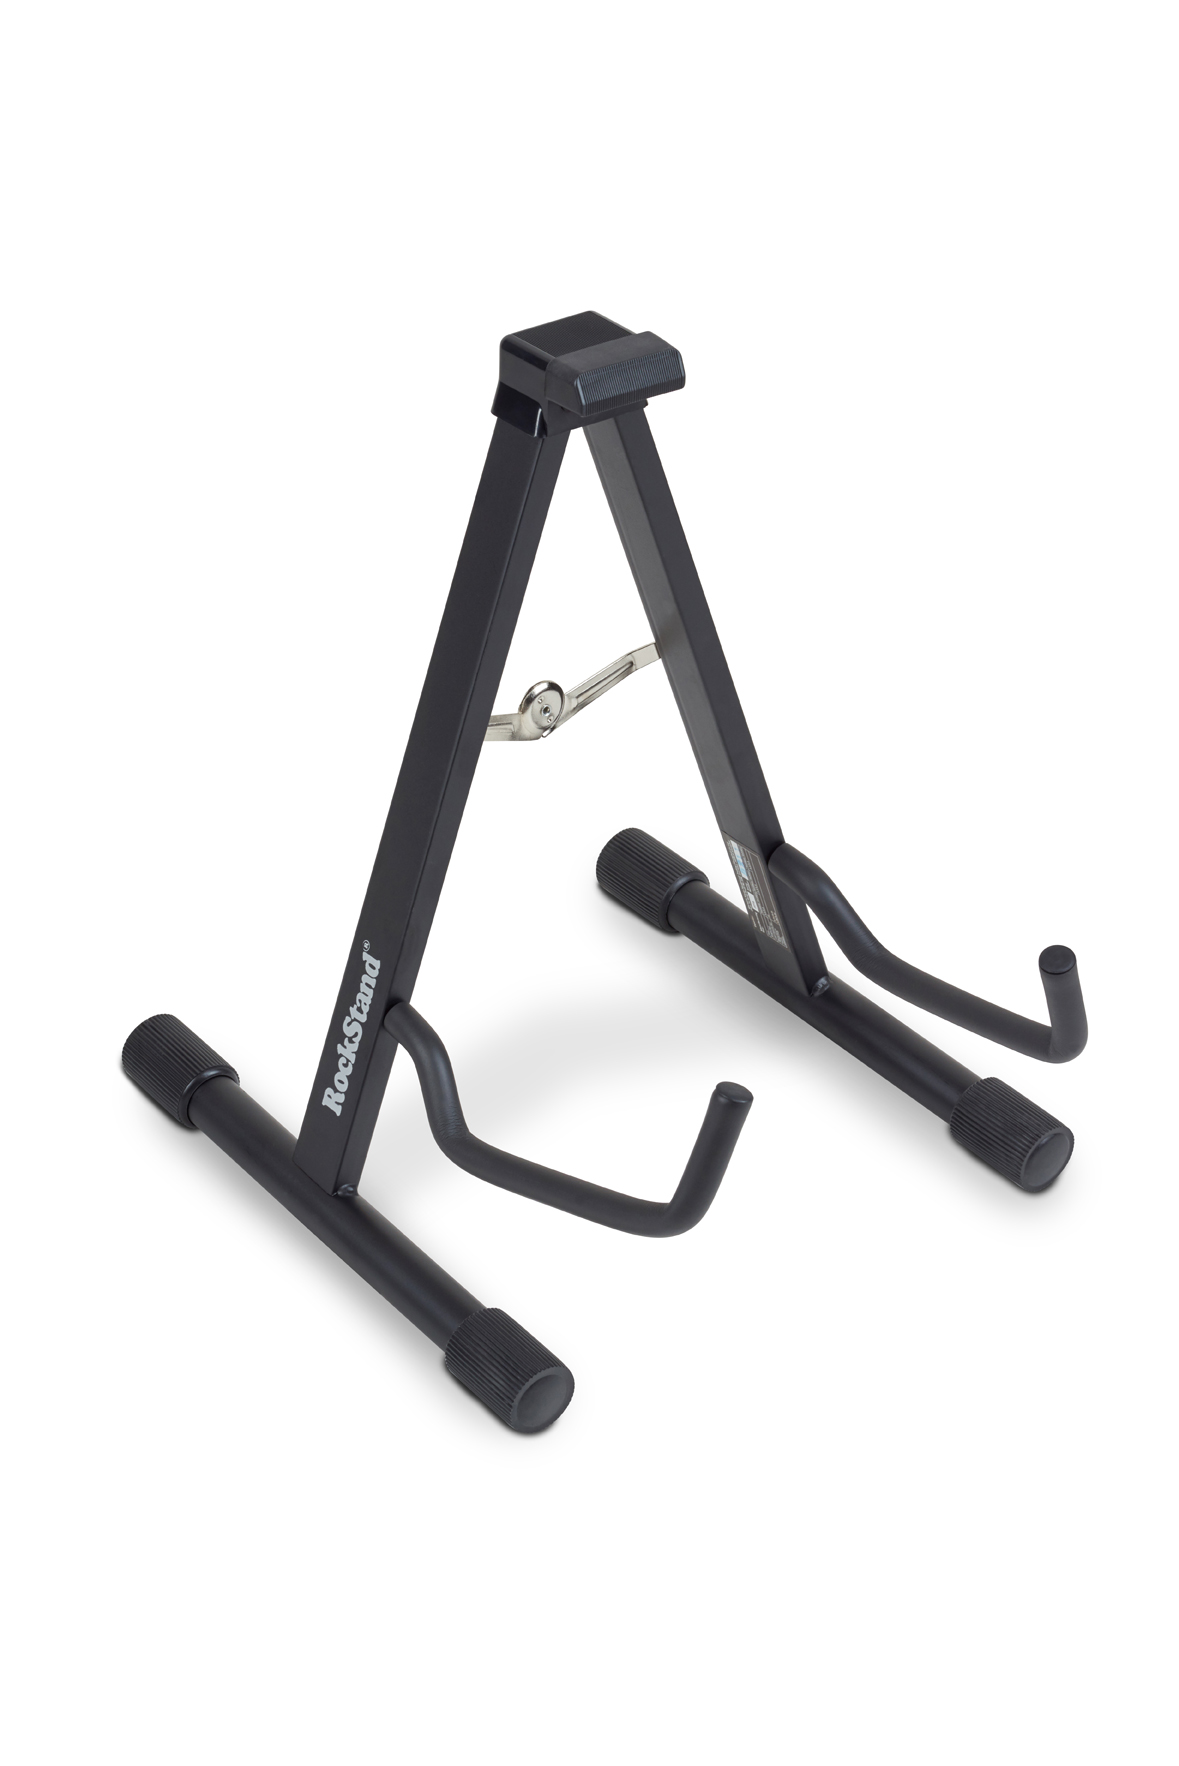 RockStand RS 20801 B - Standard A-Frame Stand - for Acoustic Guitar / Bass